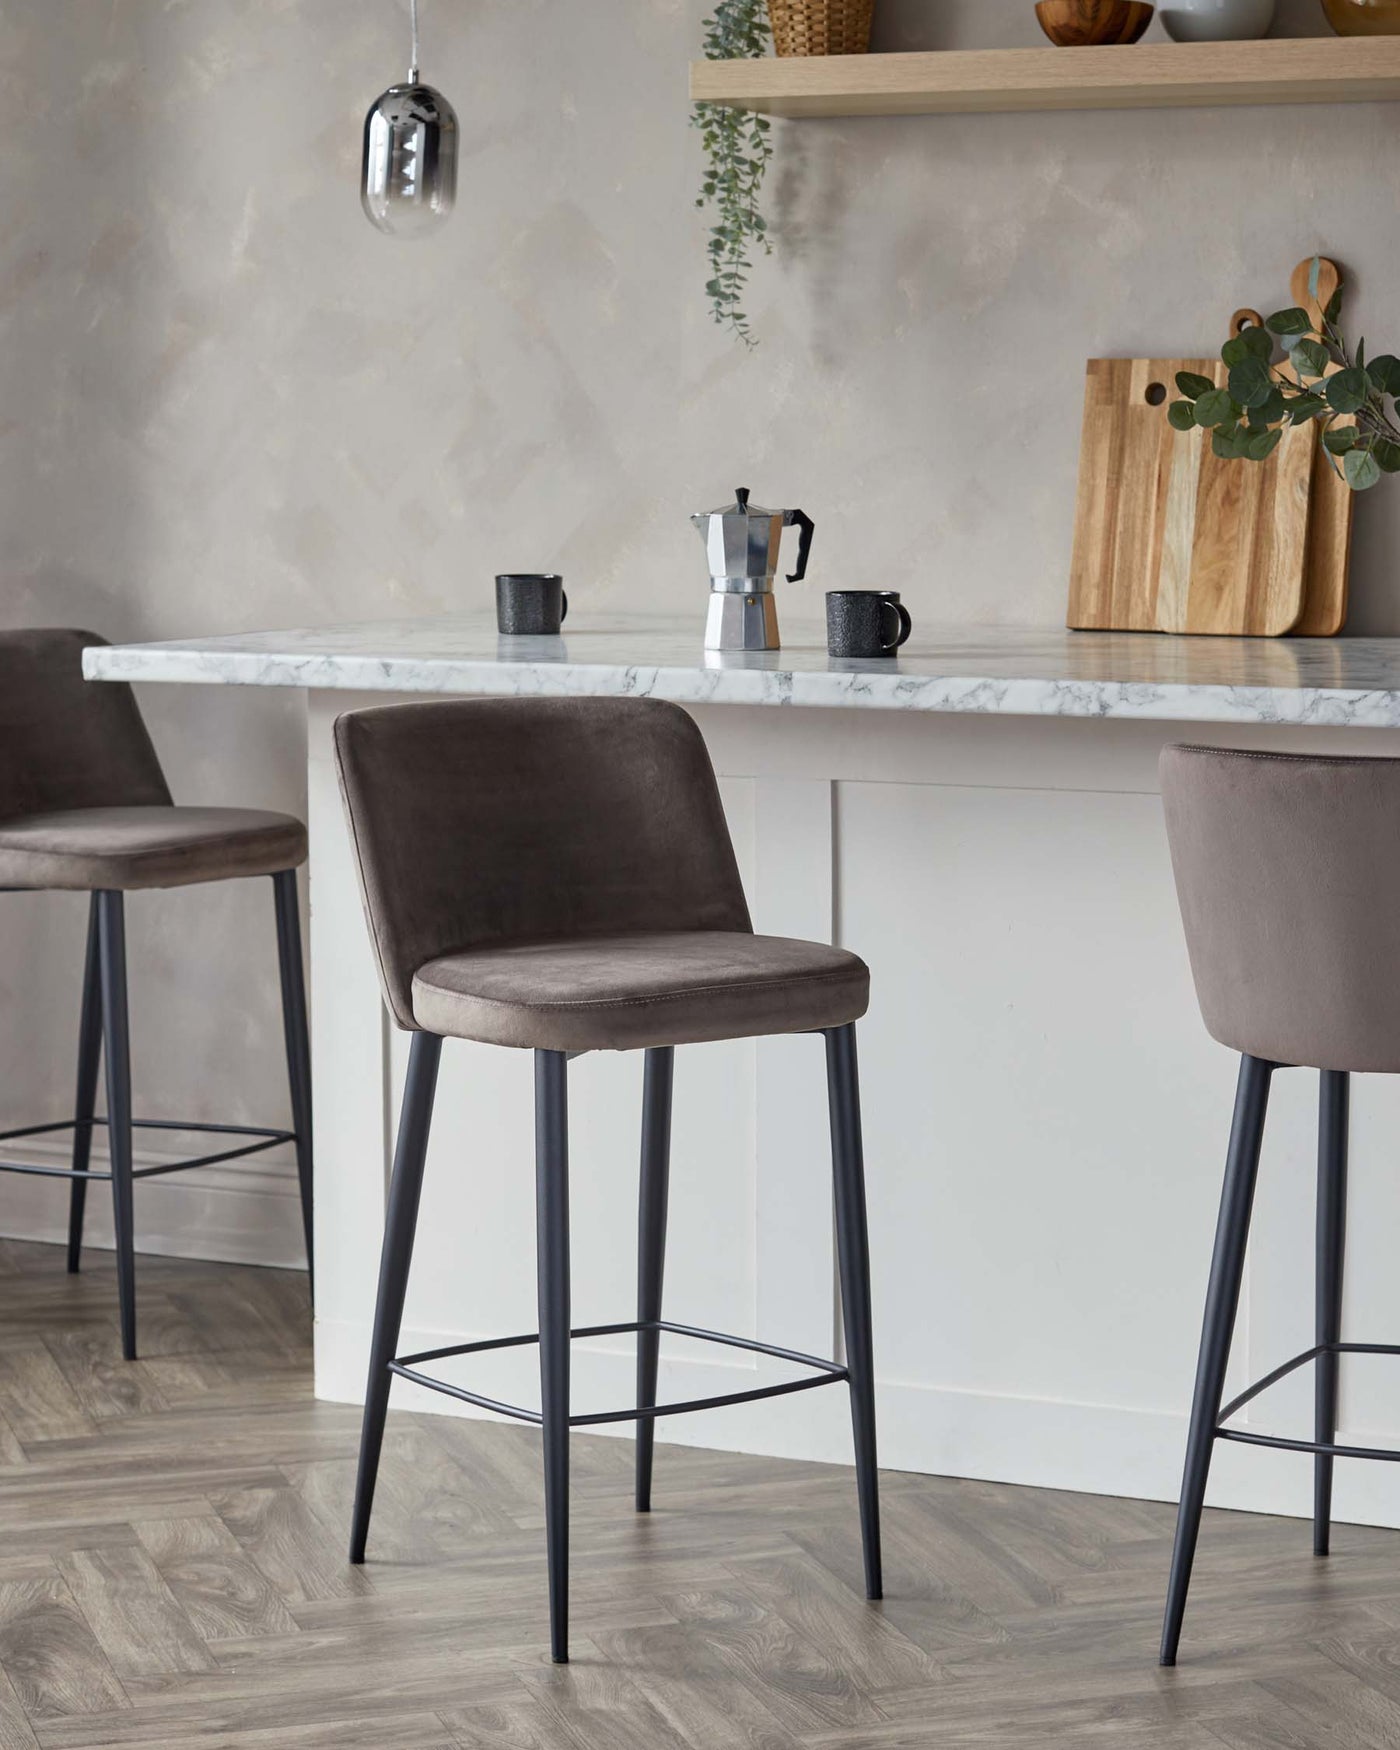 Modern kitchen interior with a pair of elegant upholstered bar stools featuring grey fabric seats and black metal legs, alongside a white marble countertop bar.